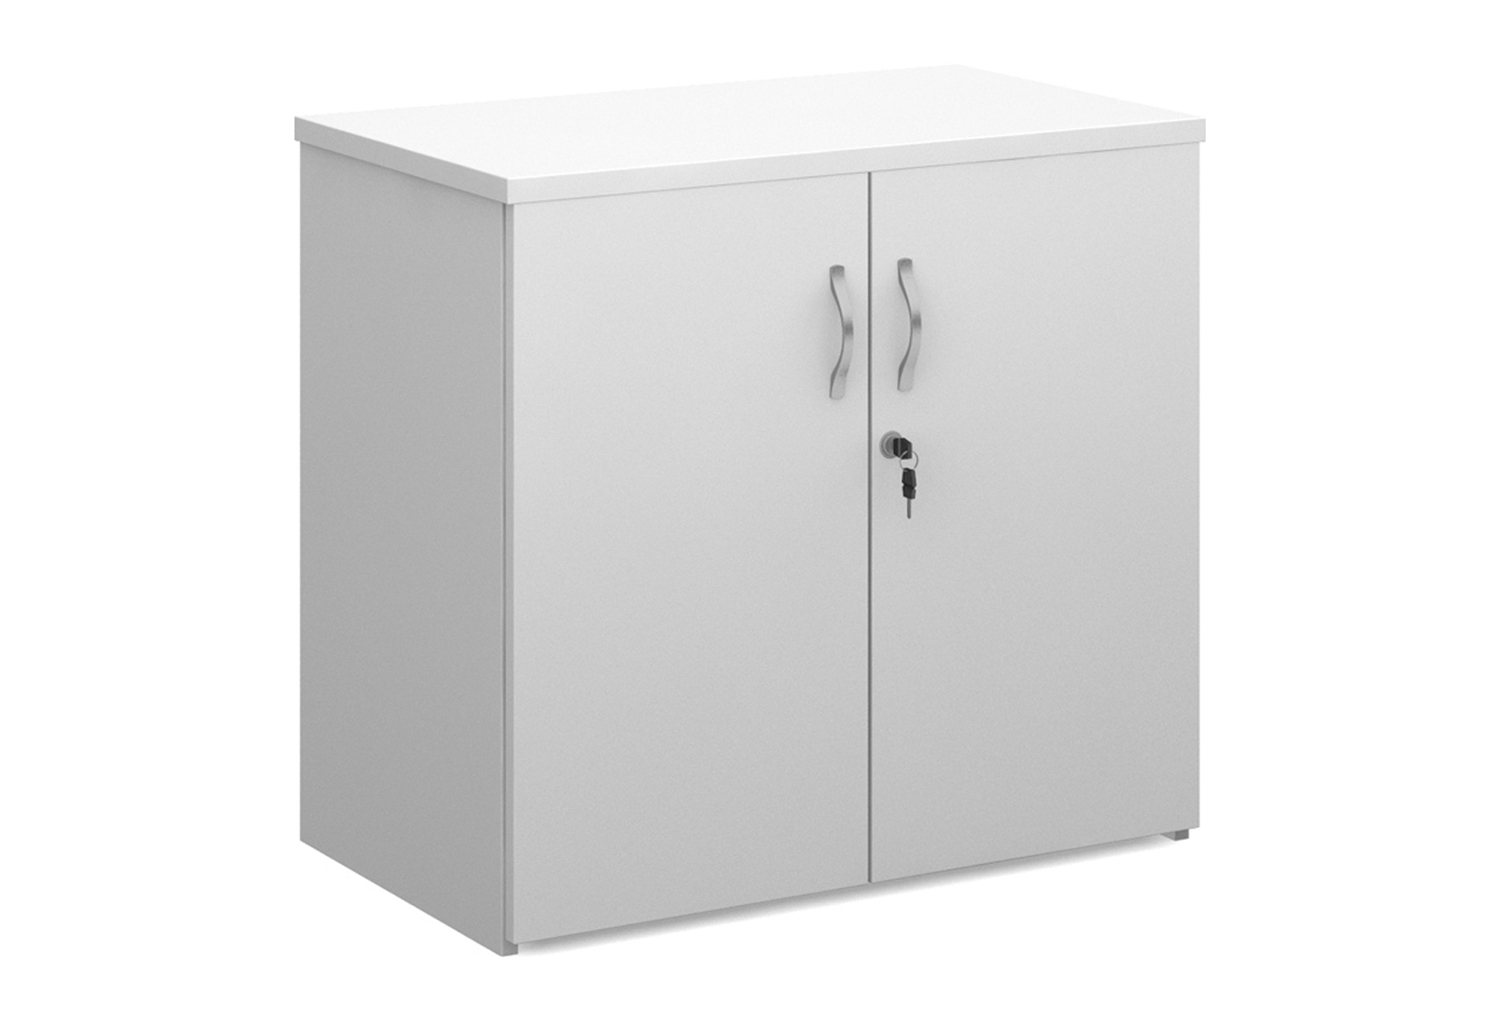 All White Cupboard, 1 Shelf - 80wx47dx74h (cm), Express Delivery